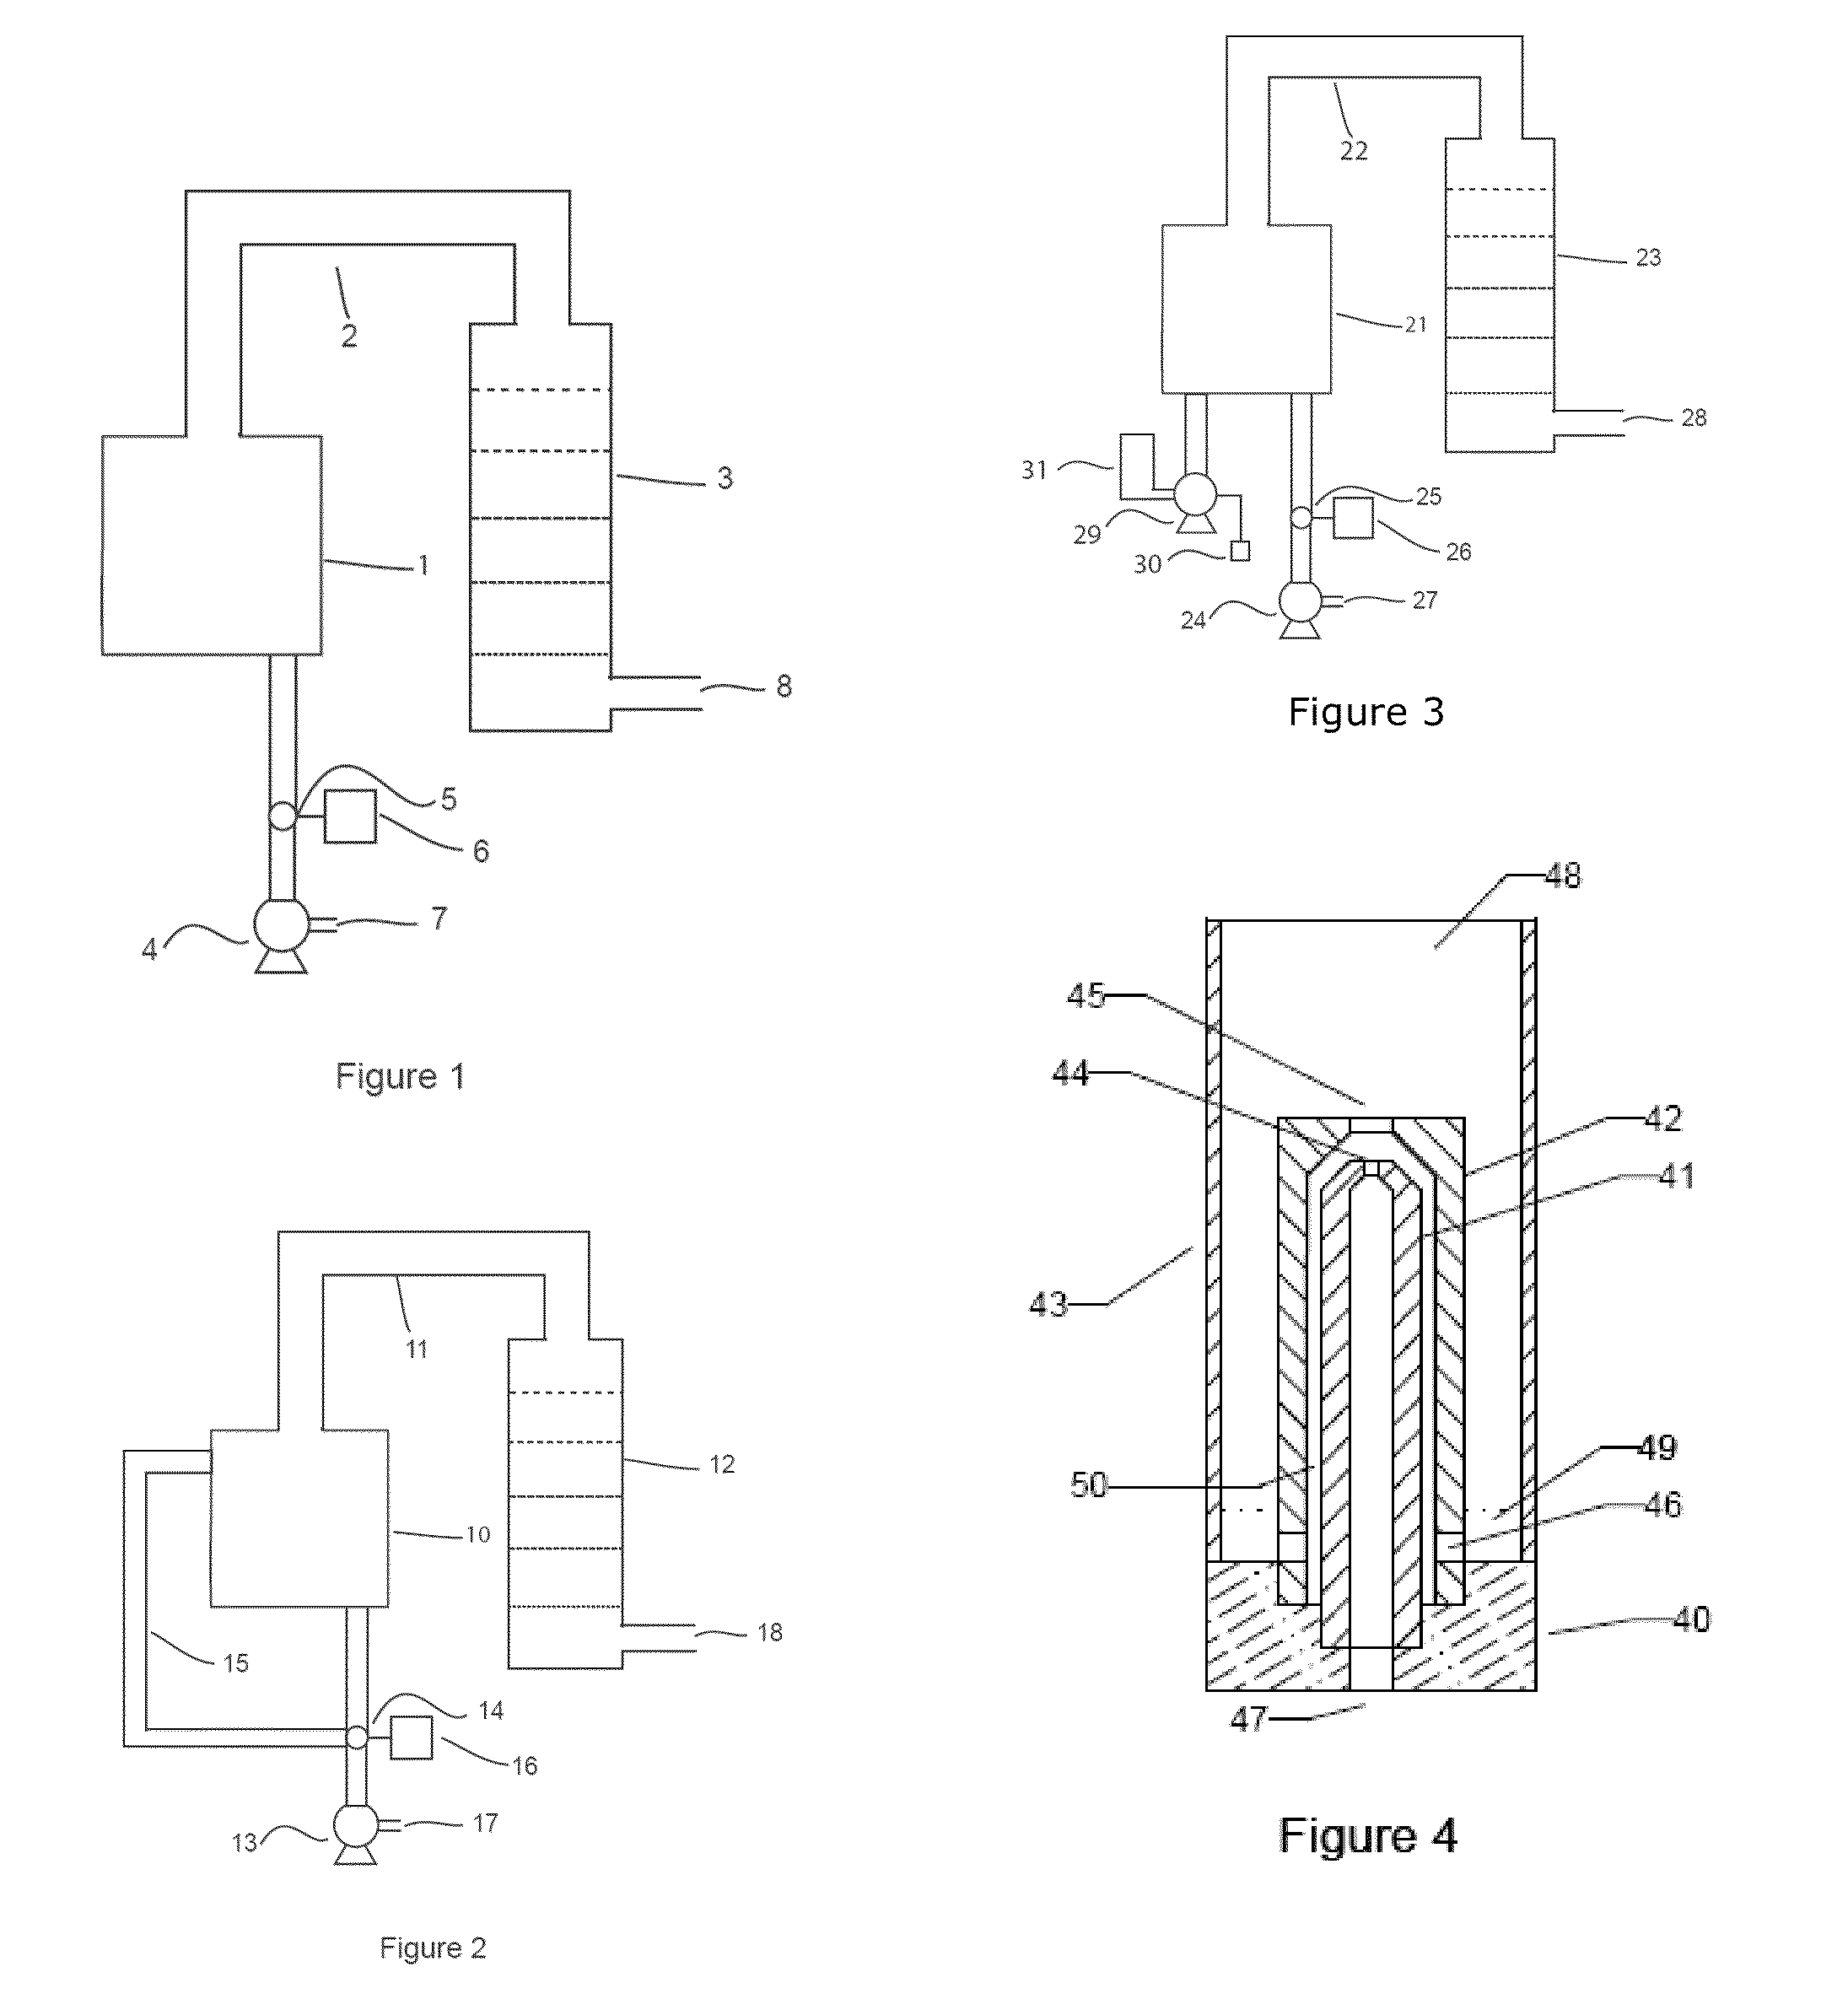 Apparatus for Localized Coating of Cascade Impactor Particle Collection Surfaces